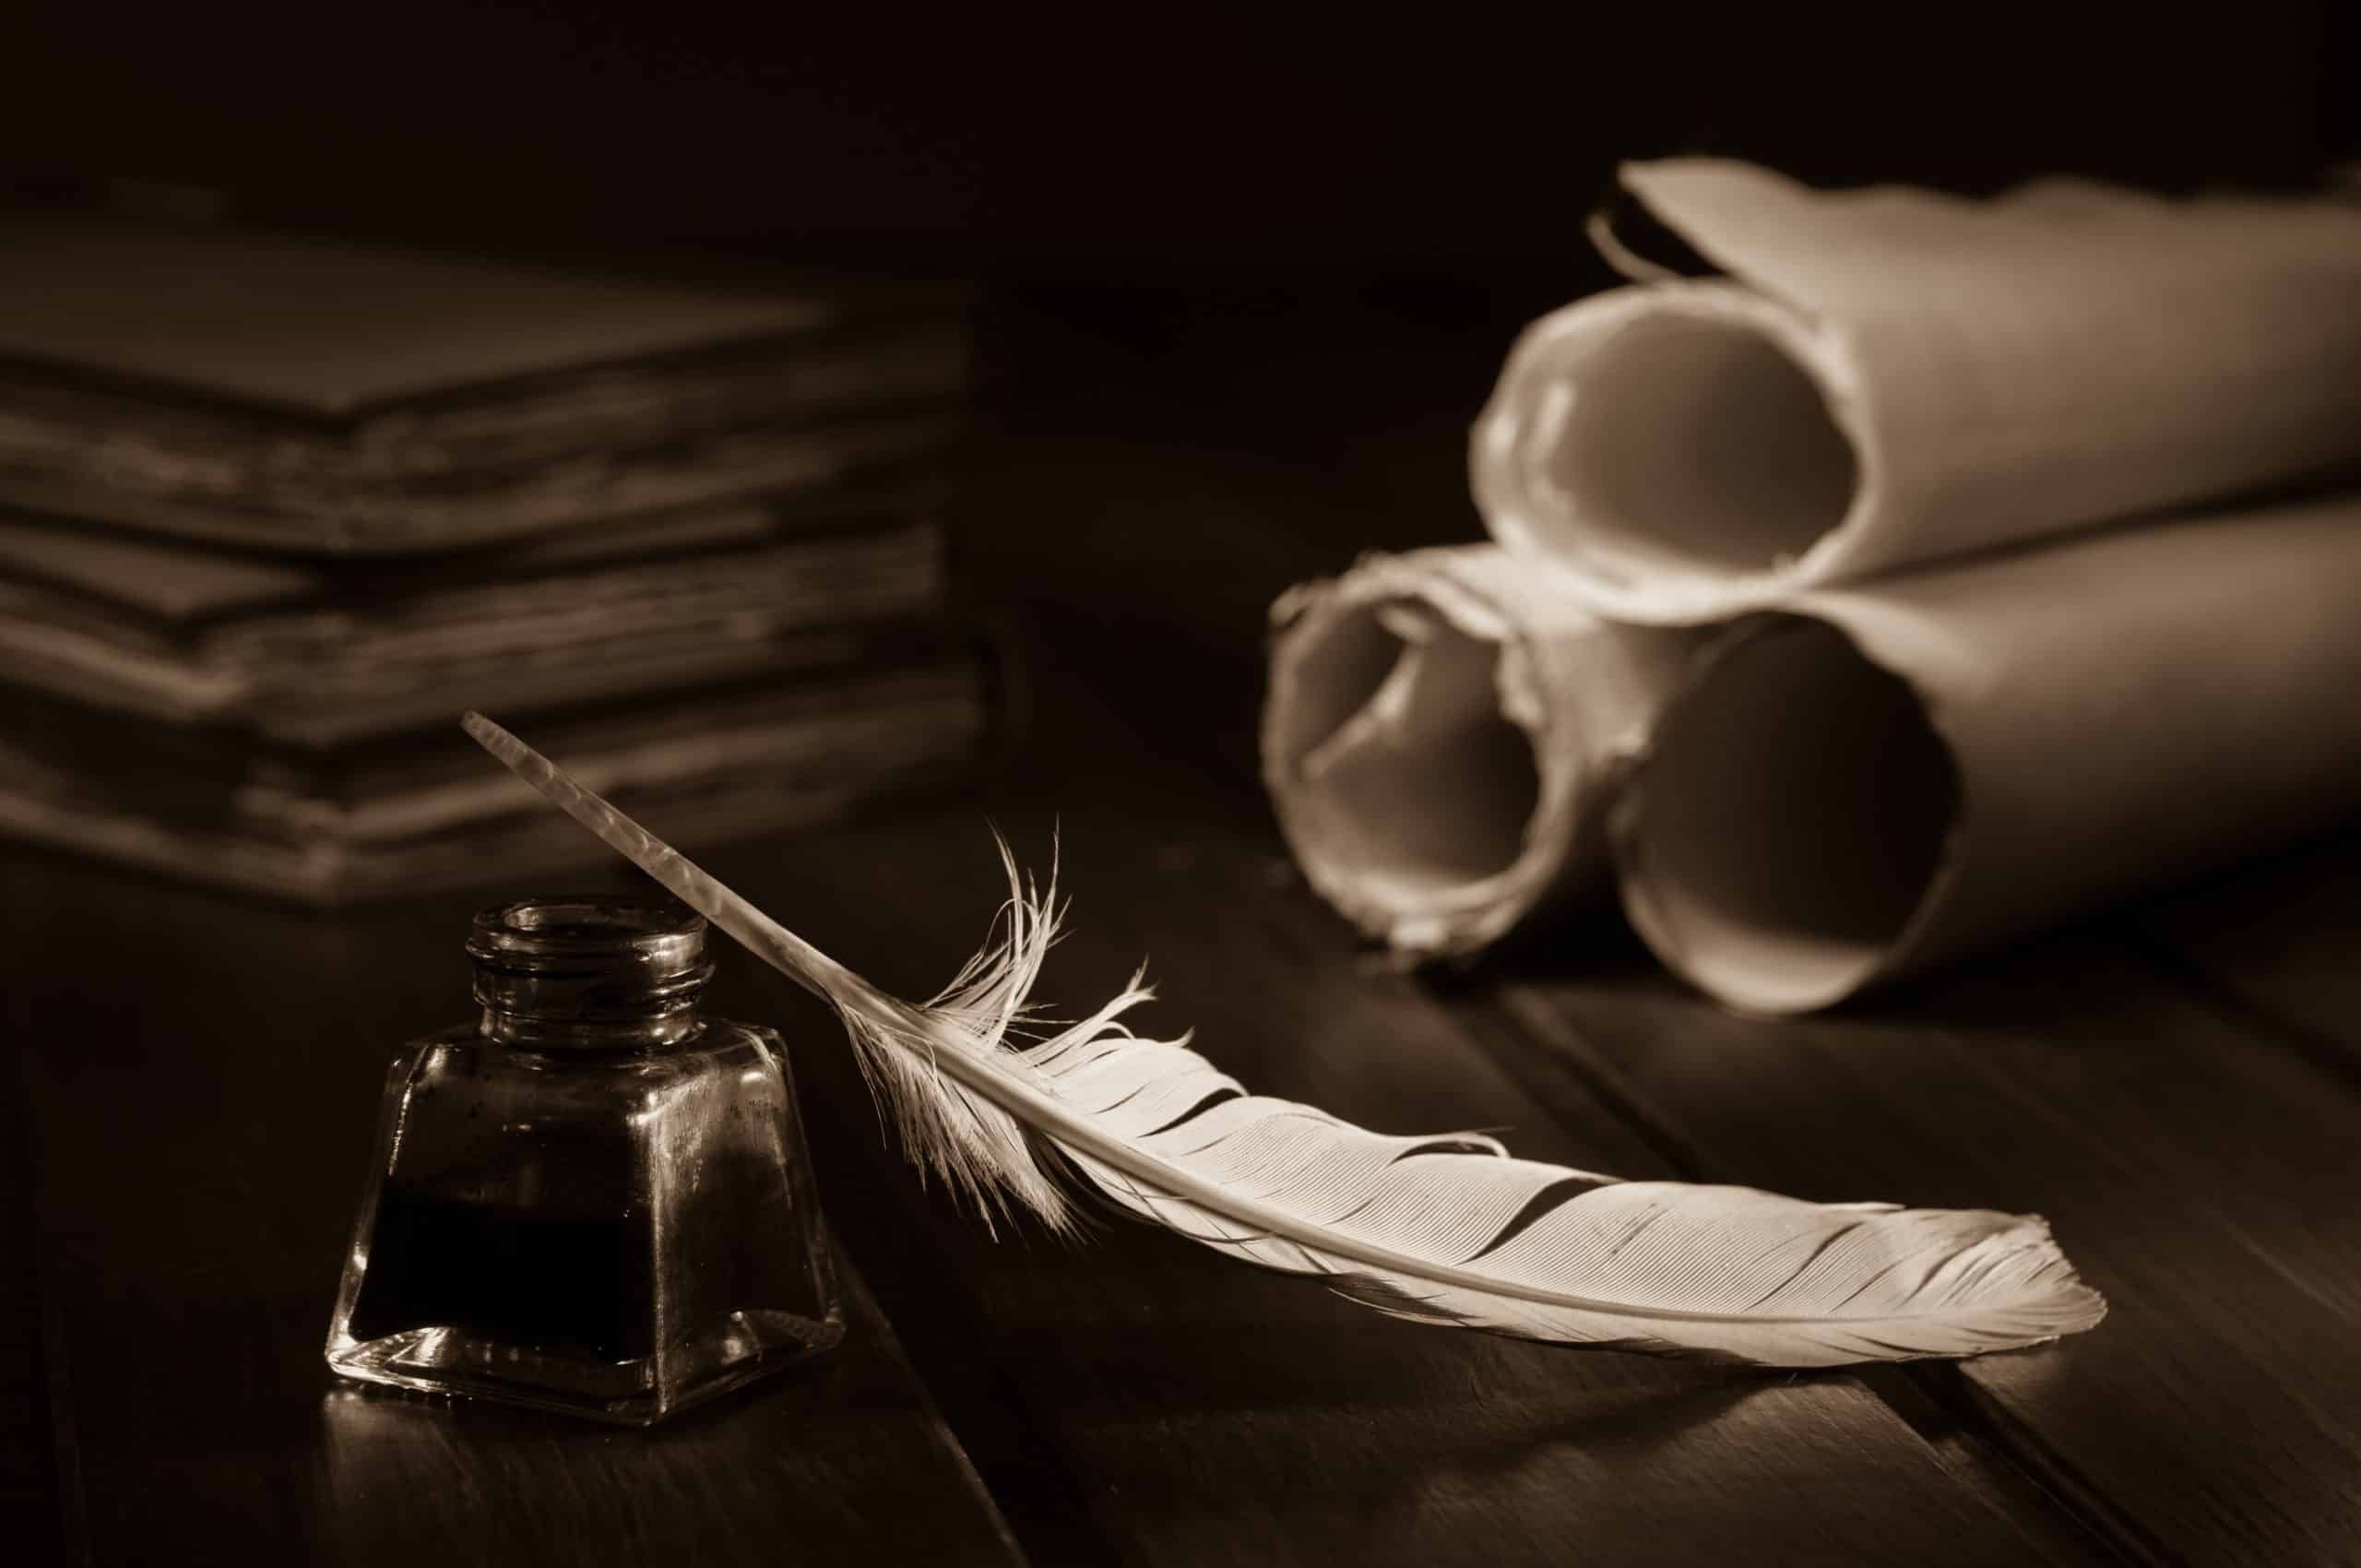 Quill pen, inkwell, and scrolls on wooden desk.